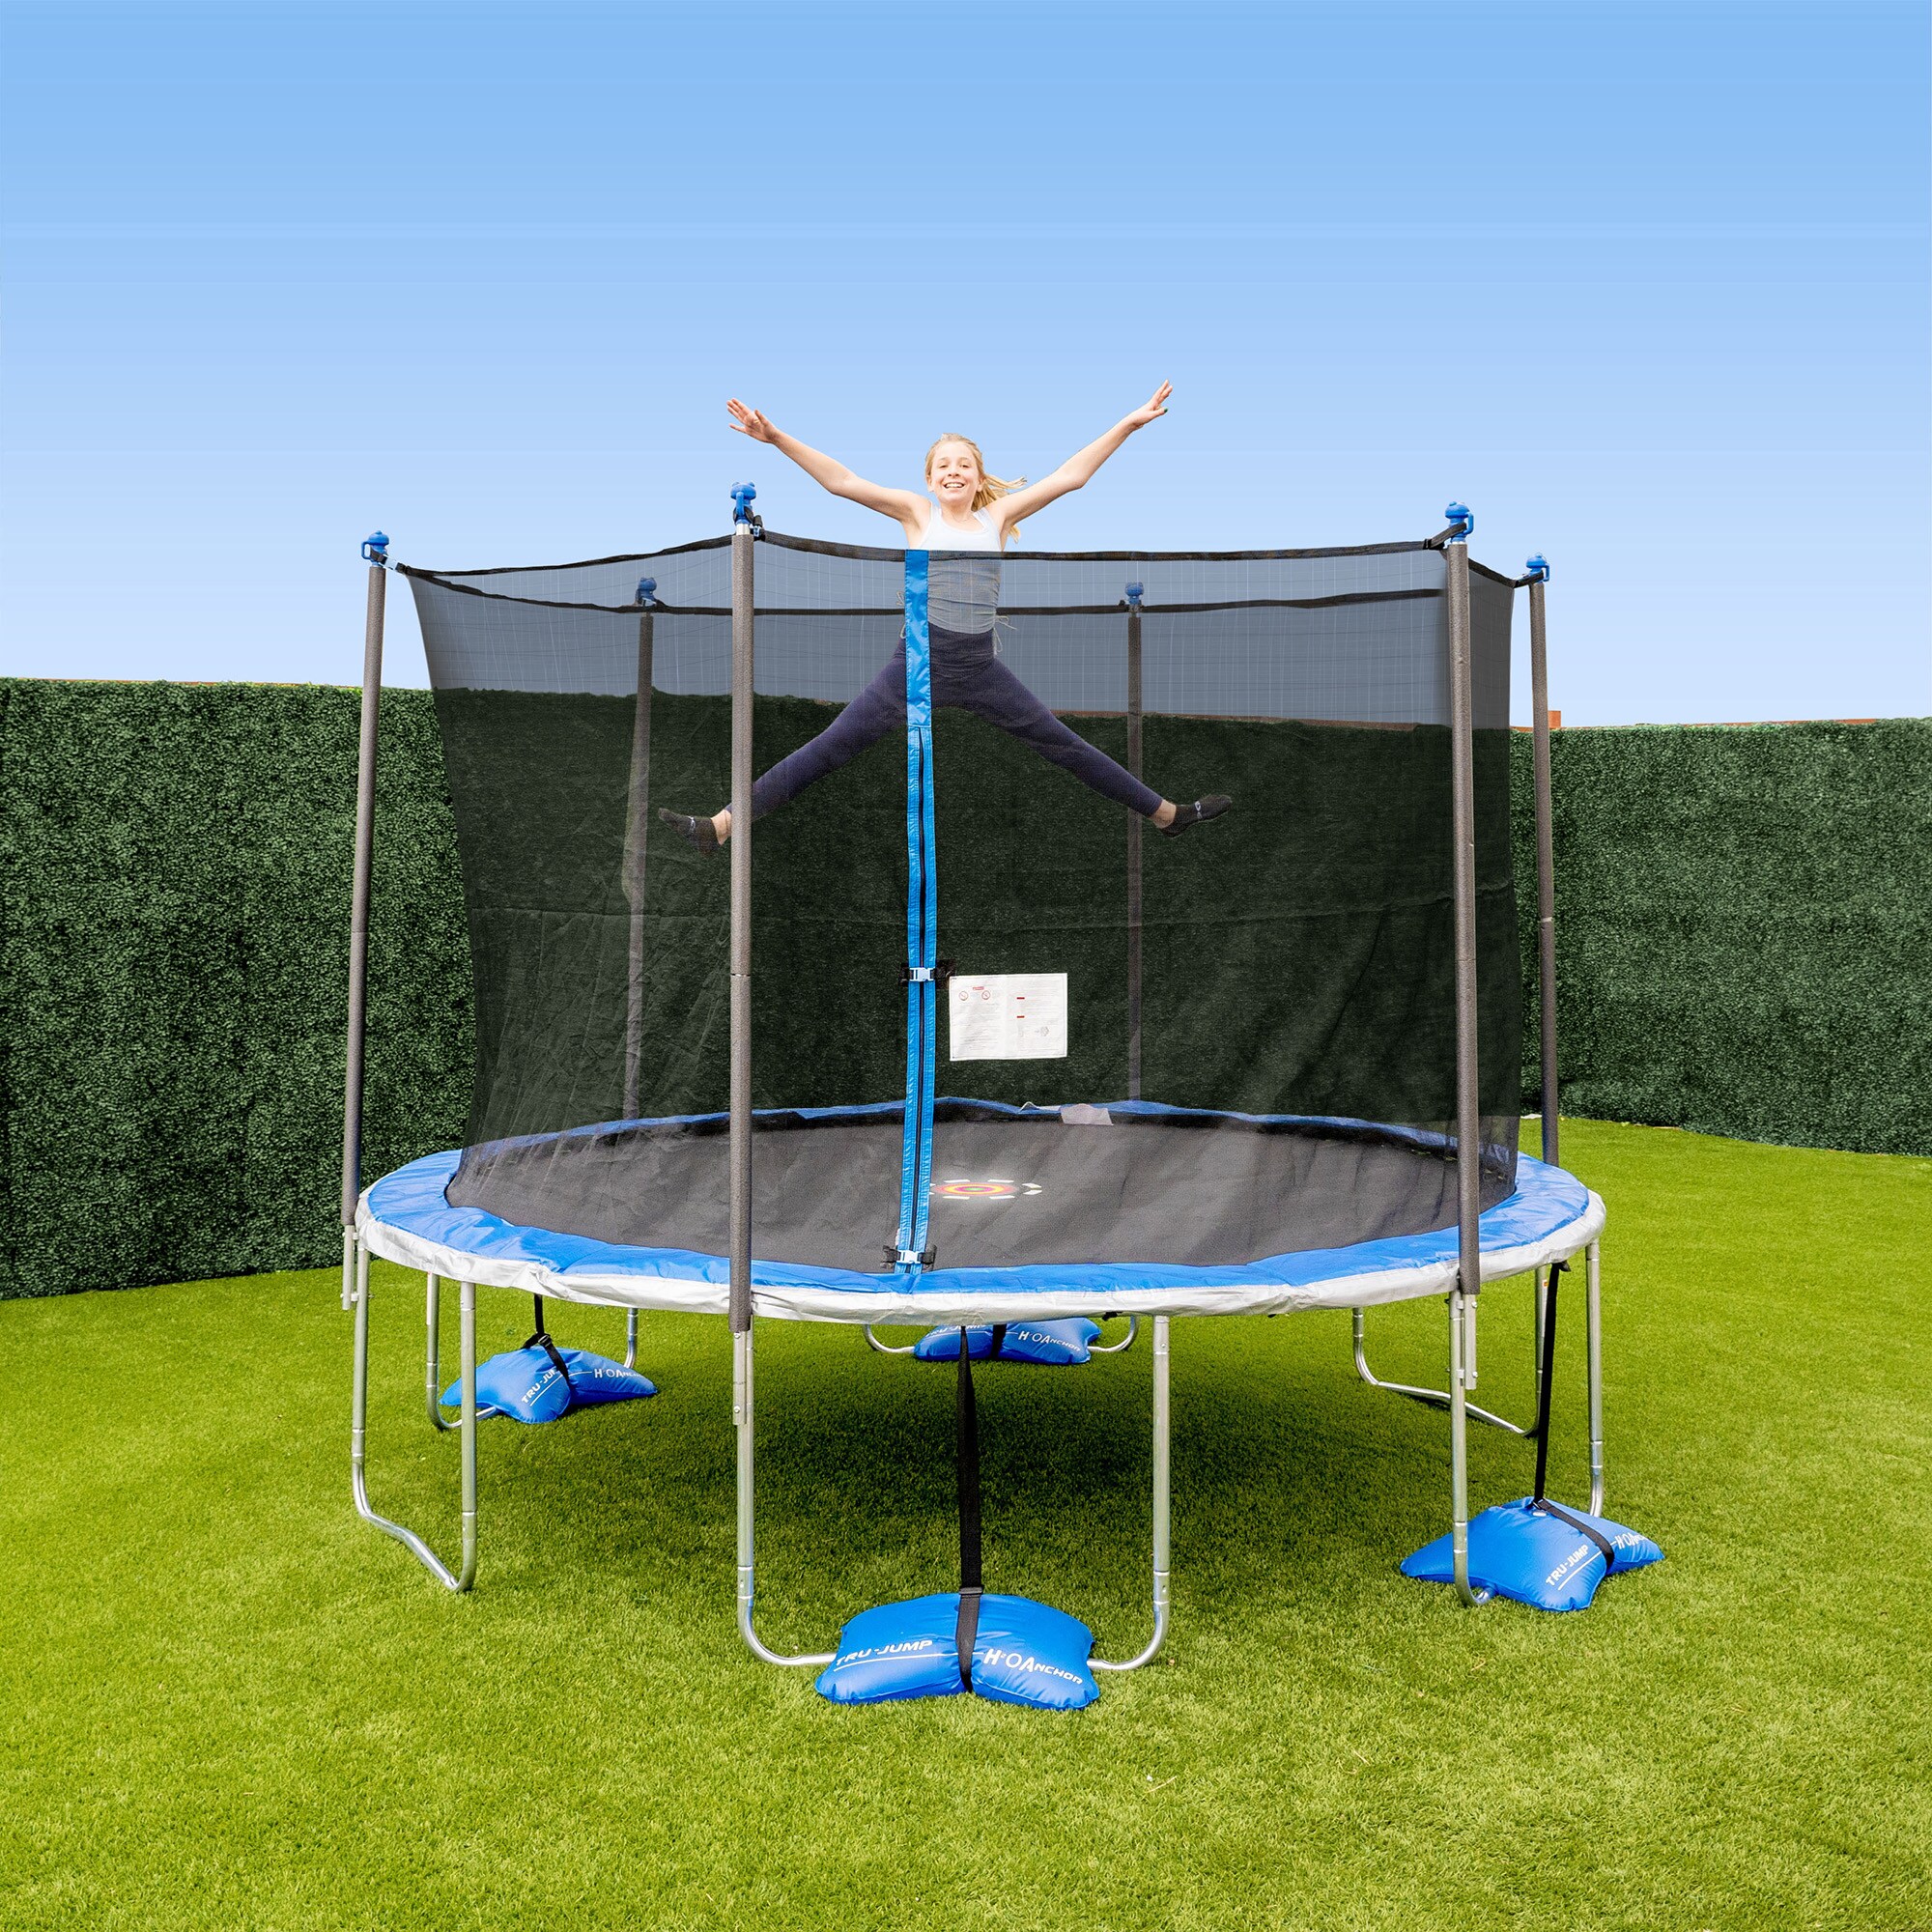 TruJump 12ft Trampoline (U-leg) and 6-pole Enclosure Combo with Spin Light and Water Anchor at Lowes.com